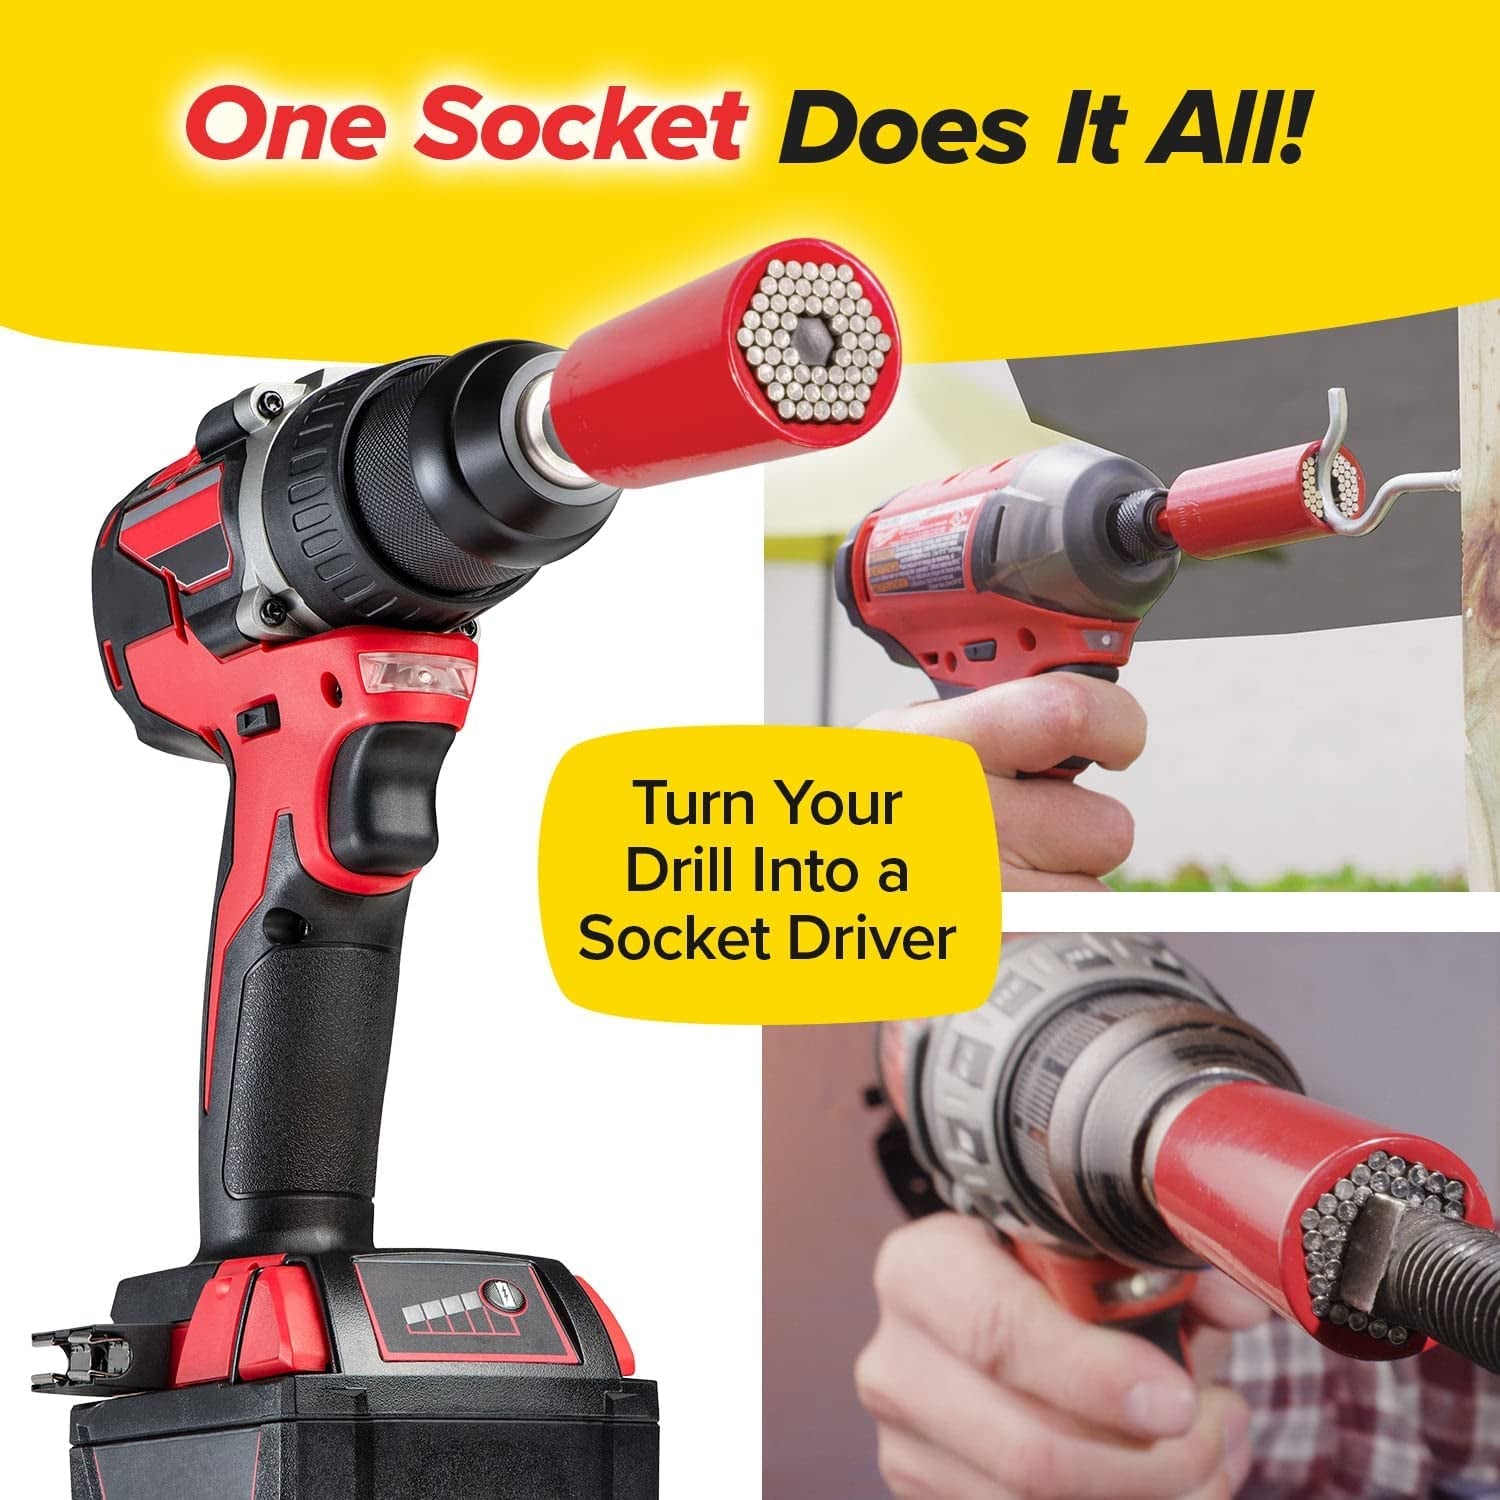 Red Dog Socket W/ Bonus Drill Adapter AS-SEEN-ON-TV, Fits Most Nuts, Bolts, Use with Most Socket Wrenches & Power Drills, Steel Rods Retract to Form Almost Any Shape, Standard or Metric, 2 In.